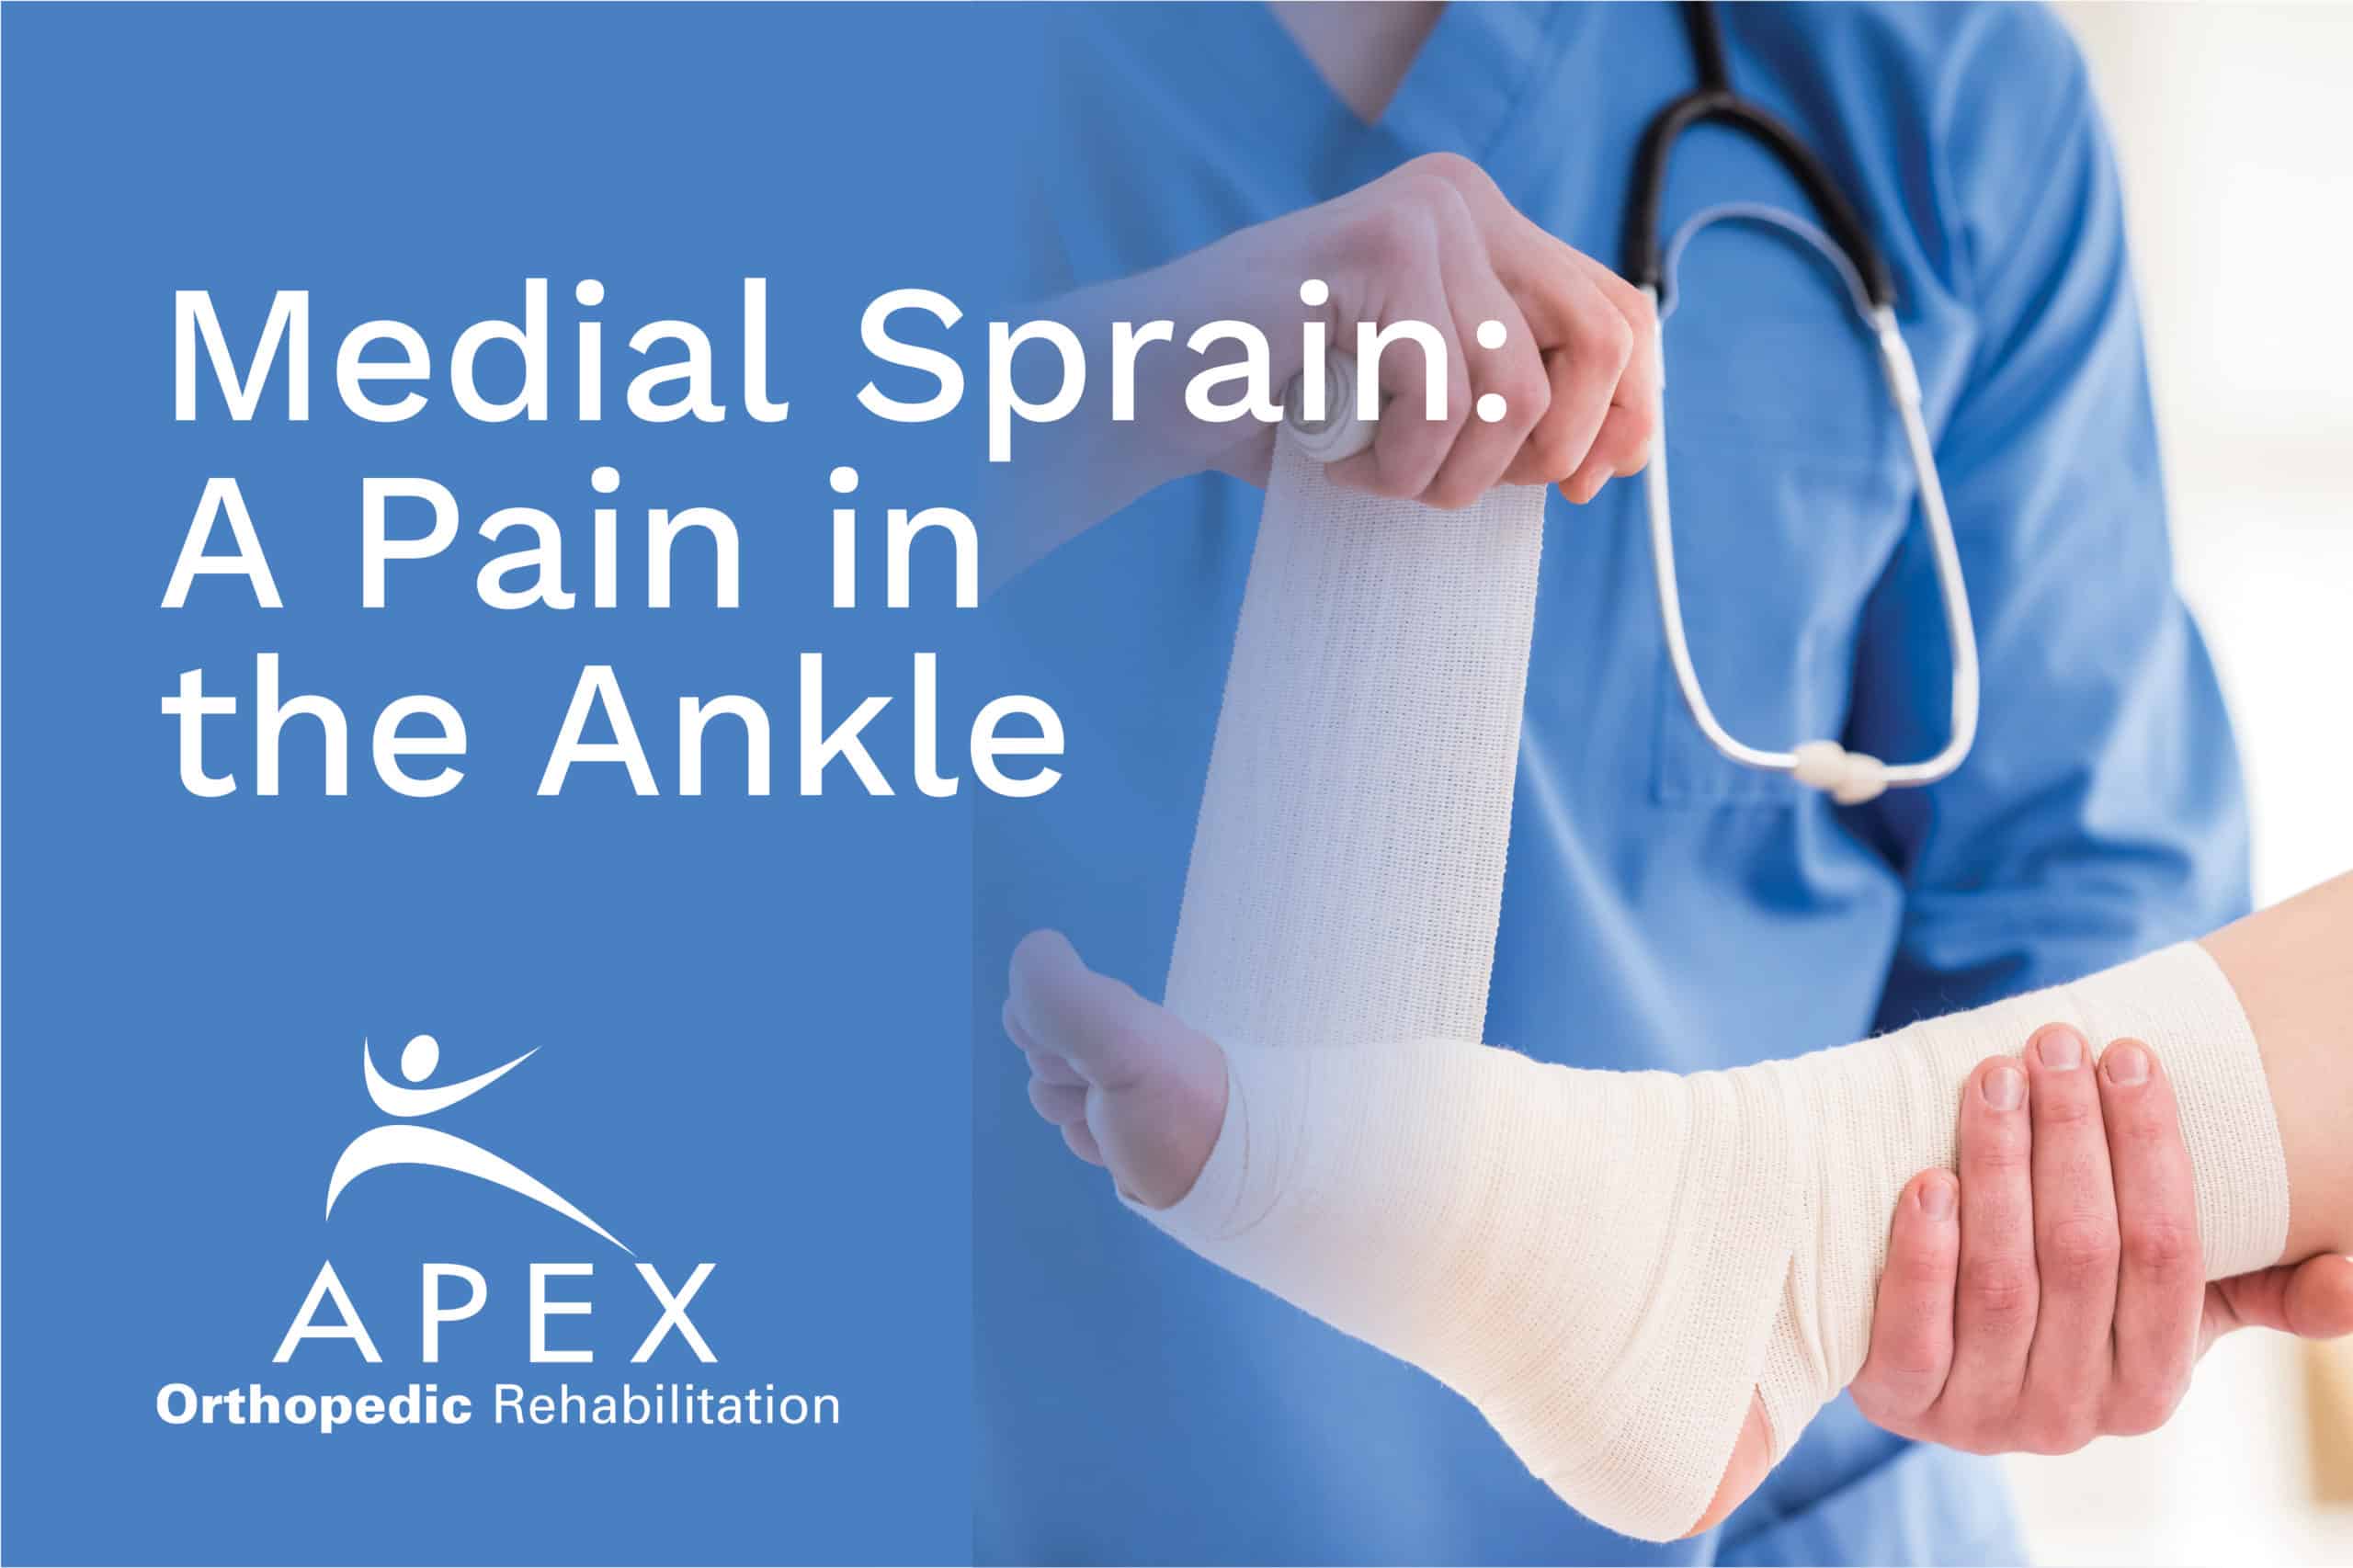 Medial Sprain: A Pain in the Ankle